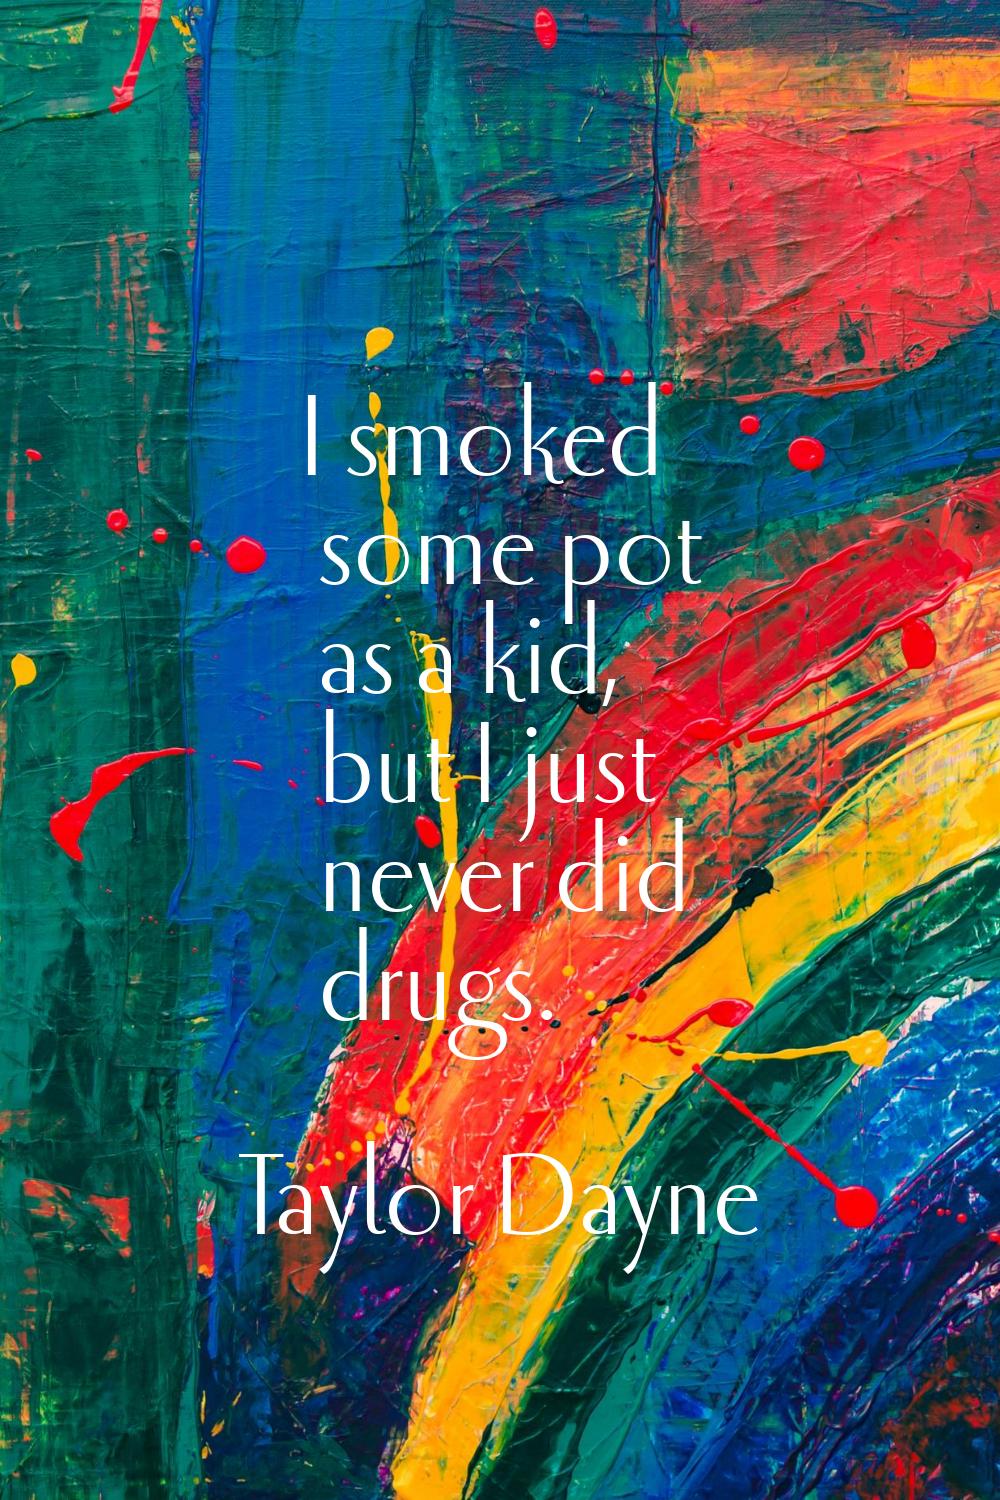 I smoked some pot as a kid, but I just never did drugs.